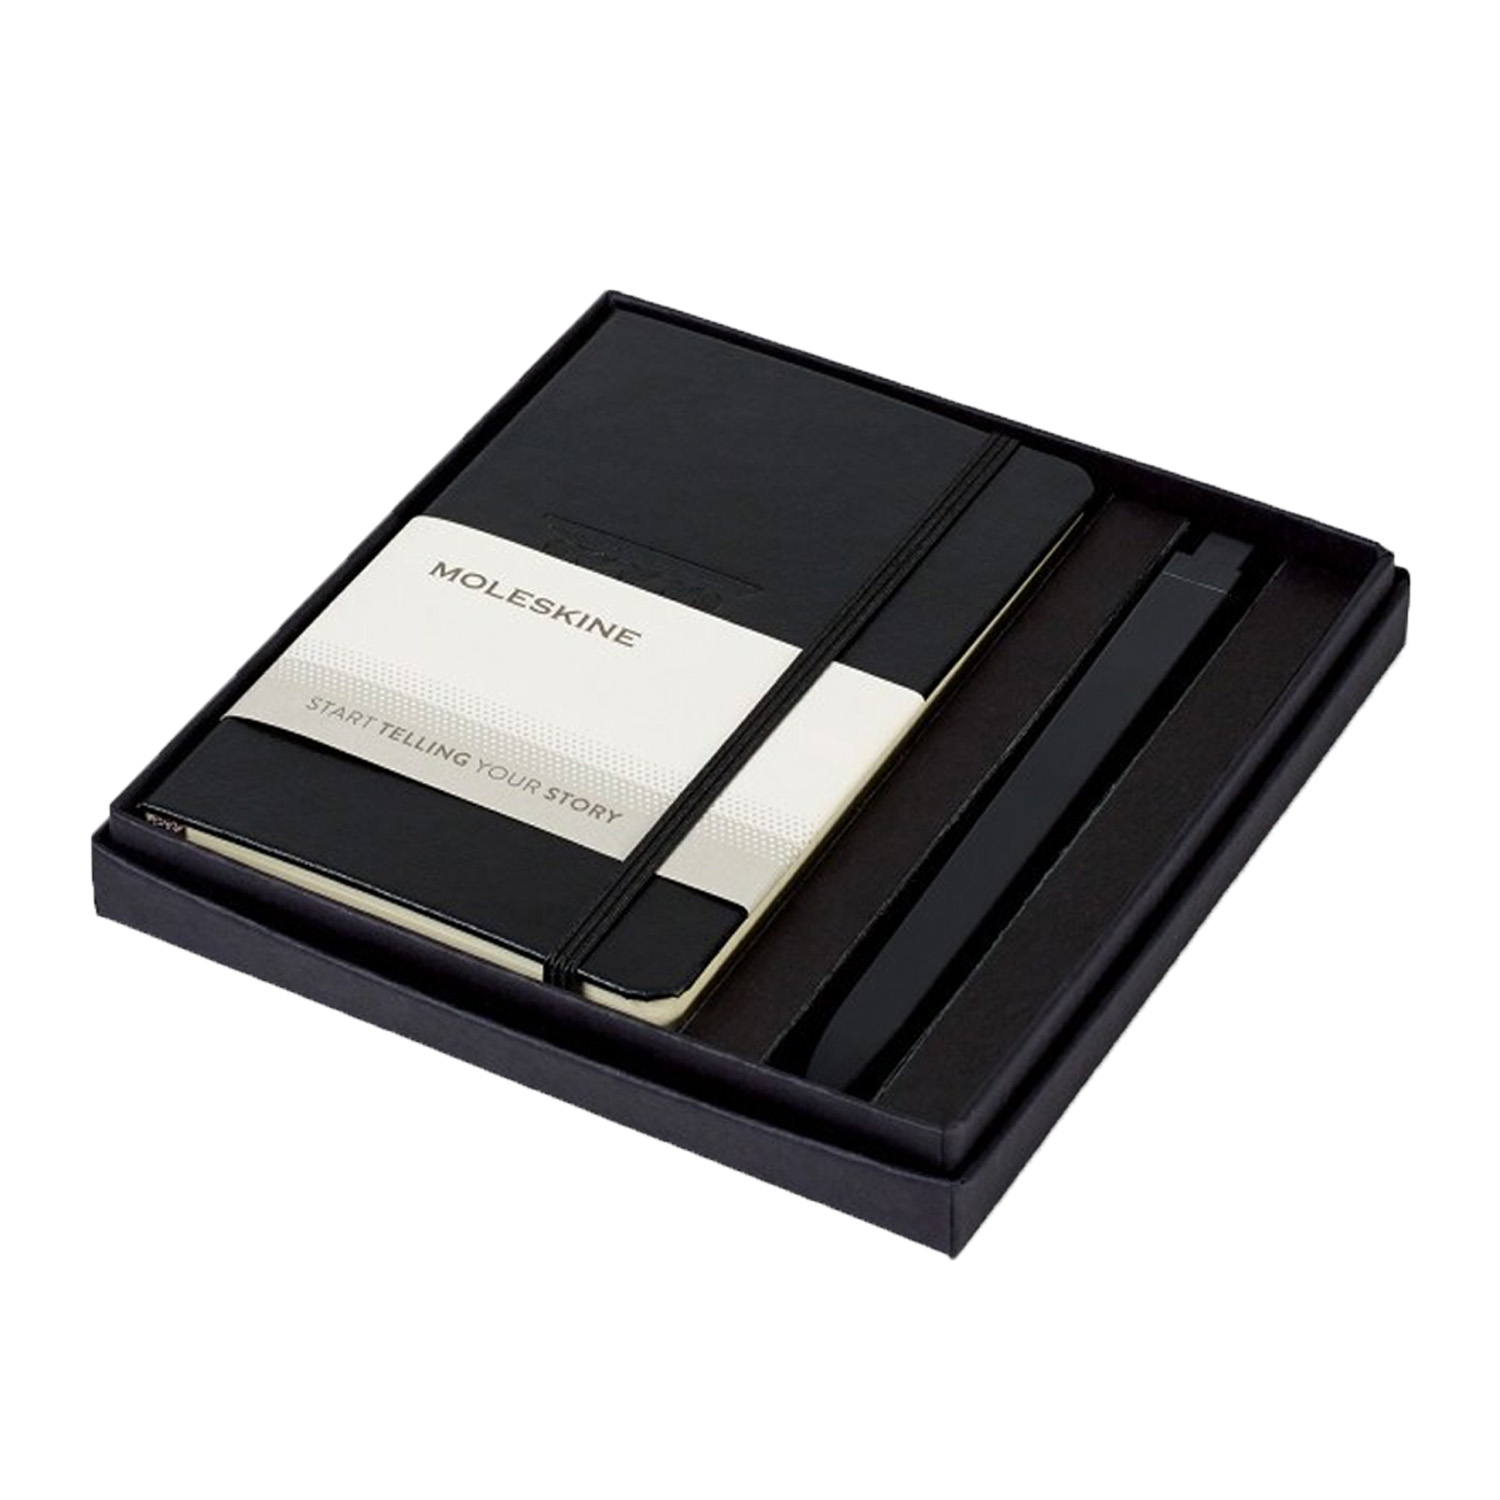 Office Gift Set | Recycled Backpack, Moleskine® Notebook & Pen | Reusable